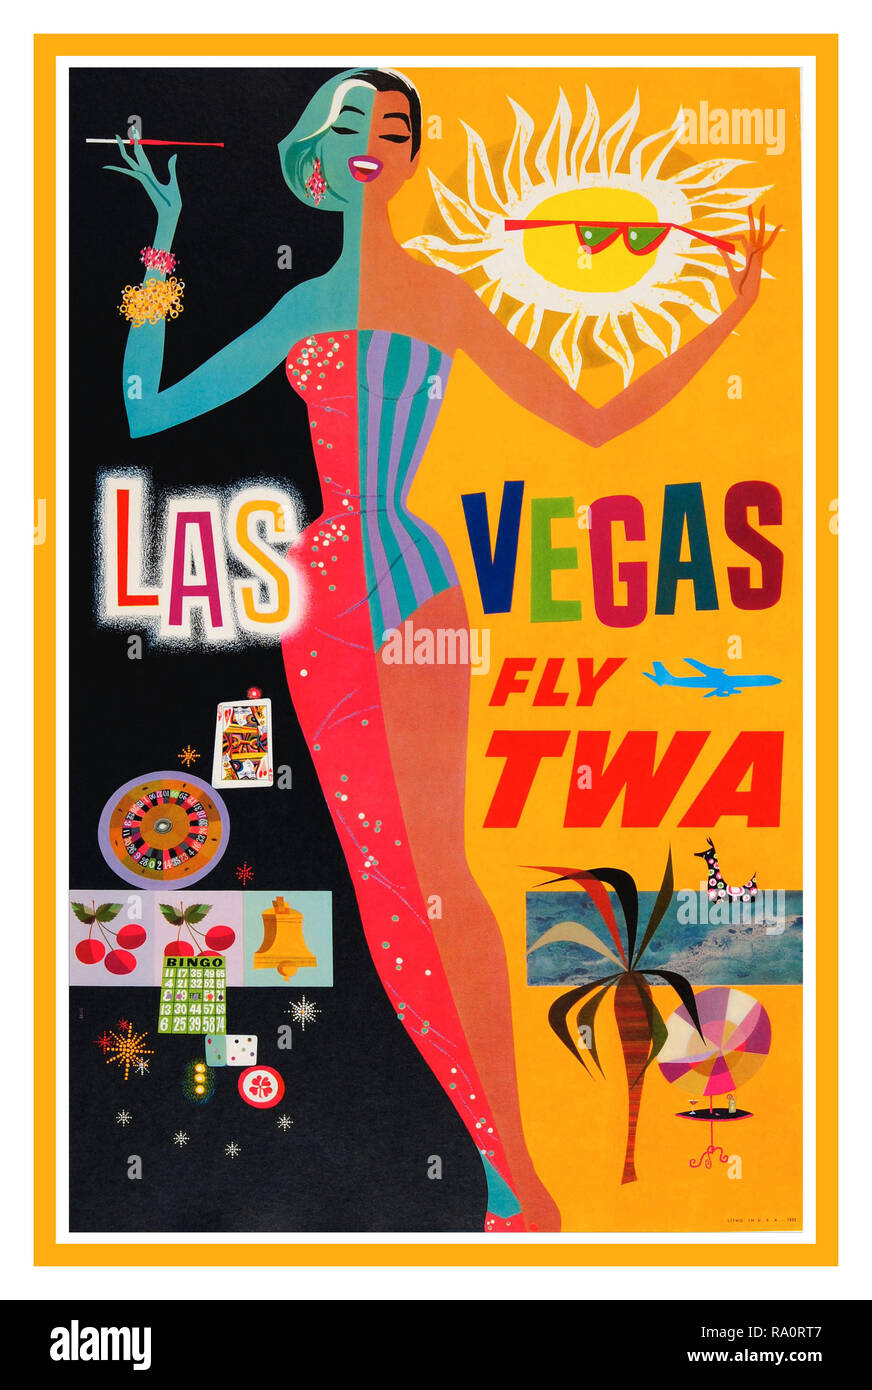 LAS VEGAS fly TWA Original Vintage 1950’s Travel Trans World Airlines Poster by David Klein 'Las Vegas Fly TWA ' Travel poster advertising Las Vegas by TWA, Trans World Airlines. Graphic artwork featuring elegant lady enjoying Las Vegas during the day and night, her right half wearing a  red evening dress with her right hand holding up a cigarette with cards, a roulette wheel and other gambling games depicted and her other half dressed in a bathing suit with a palm tree and drinks by a swimming pool, her left hand holding up sunglasses in front of a happy sun with a plane flying by below. Stock Photo